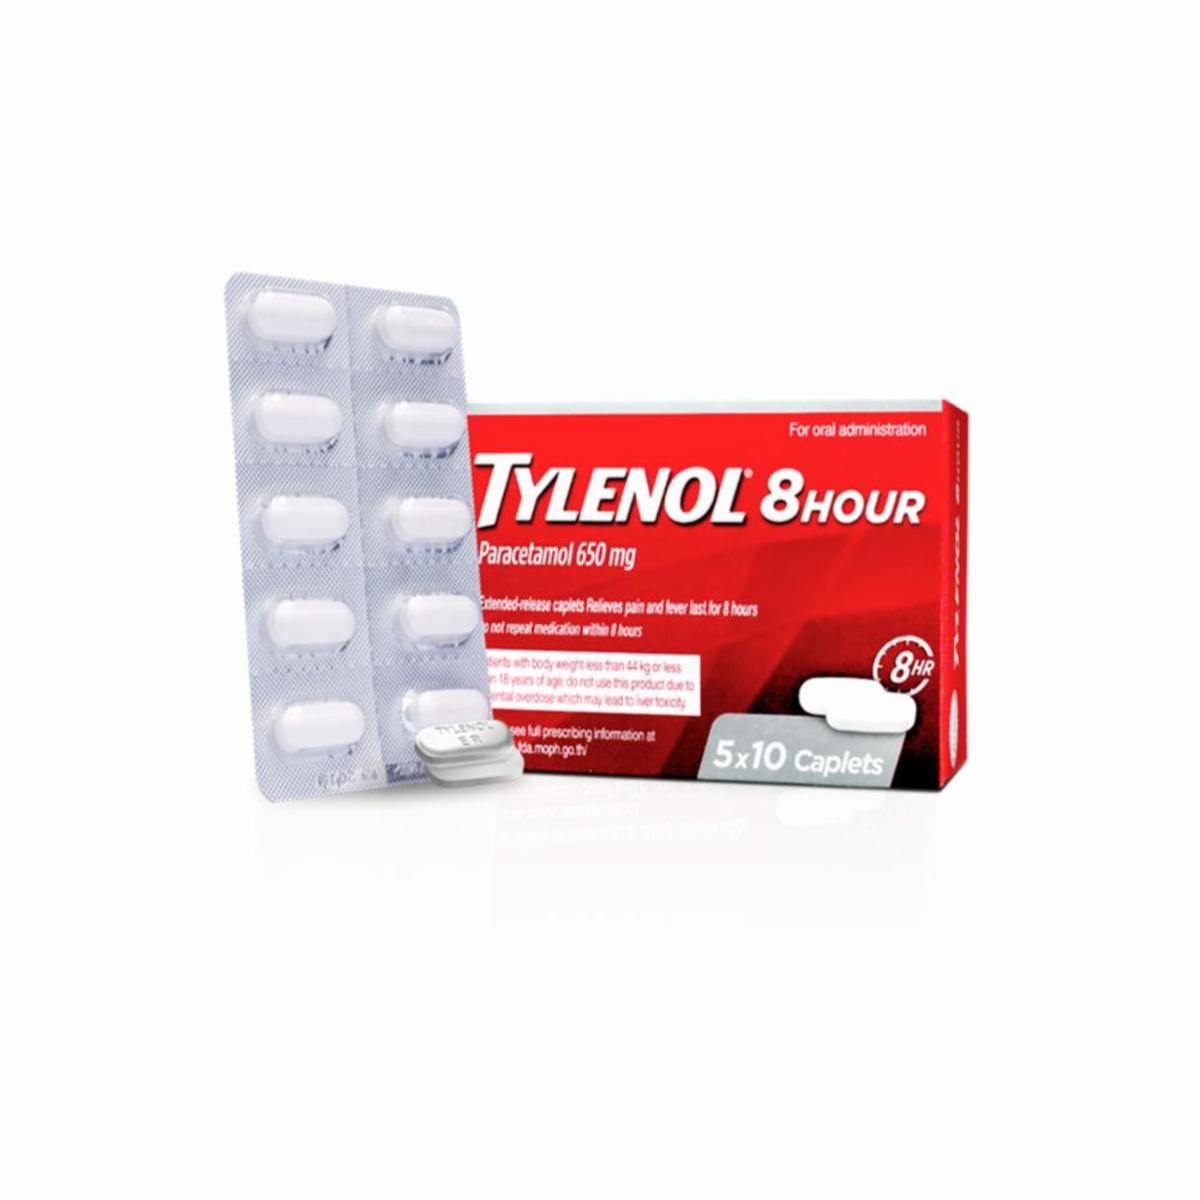 Tylenol 8 Hours Muscle Aches & Pain Relief 650mg